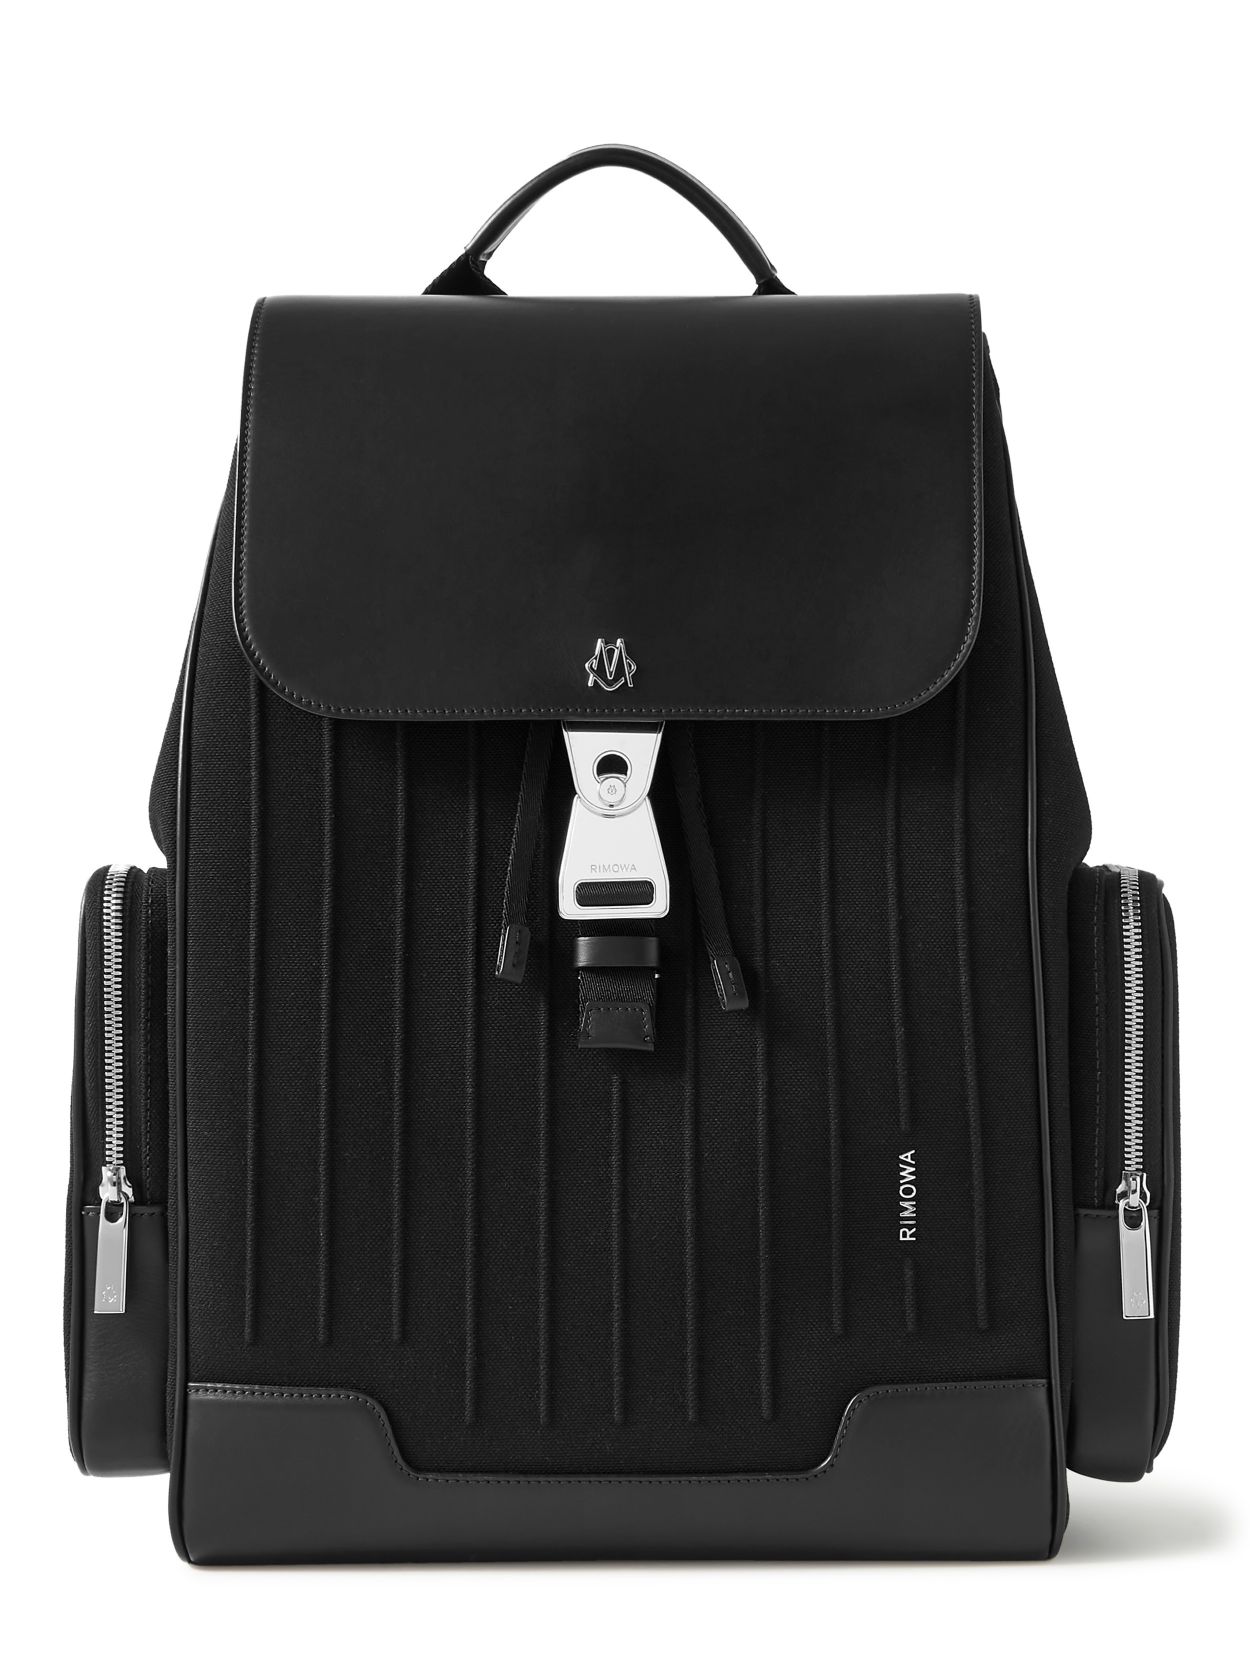 Mr Porter adds German luggage brand Rimowa to collection | Esquire ...